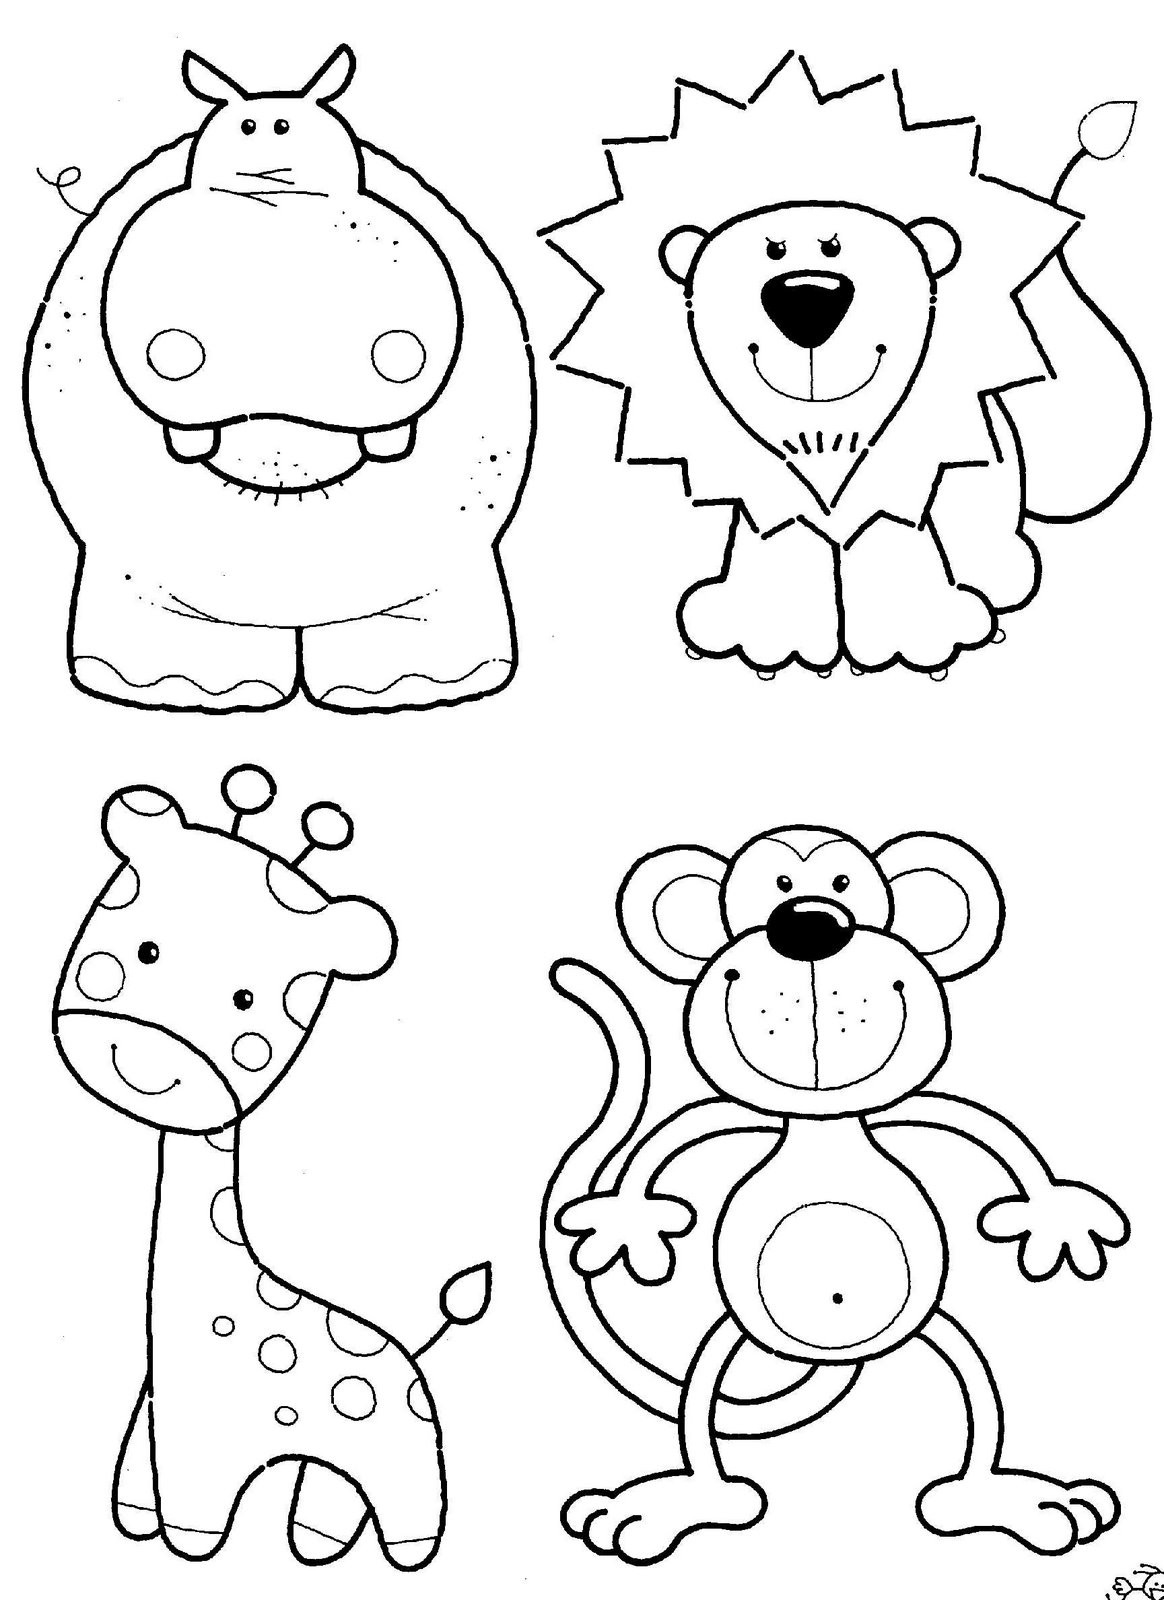 Free Animal Coloring Pages For Kids
 Coloring Ville